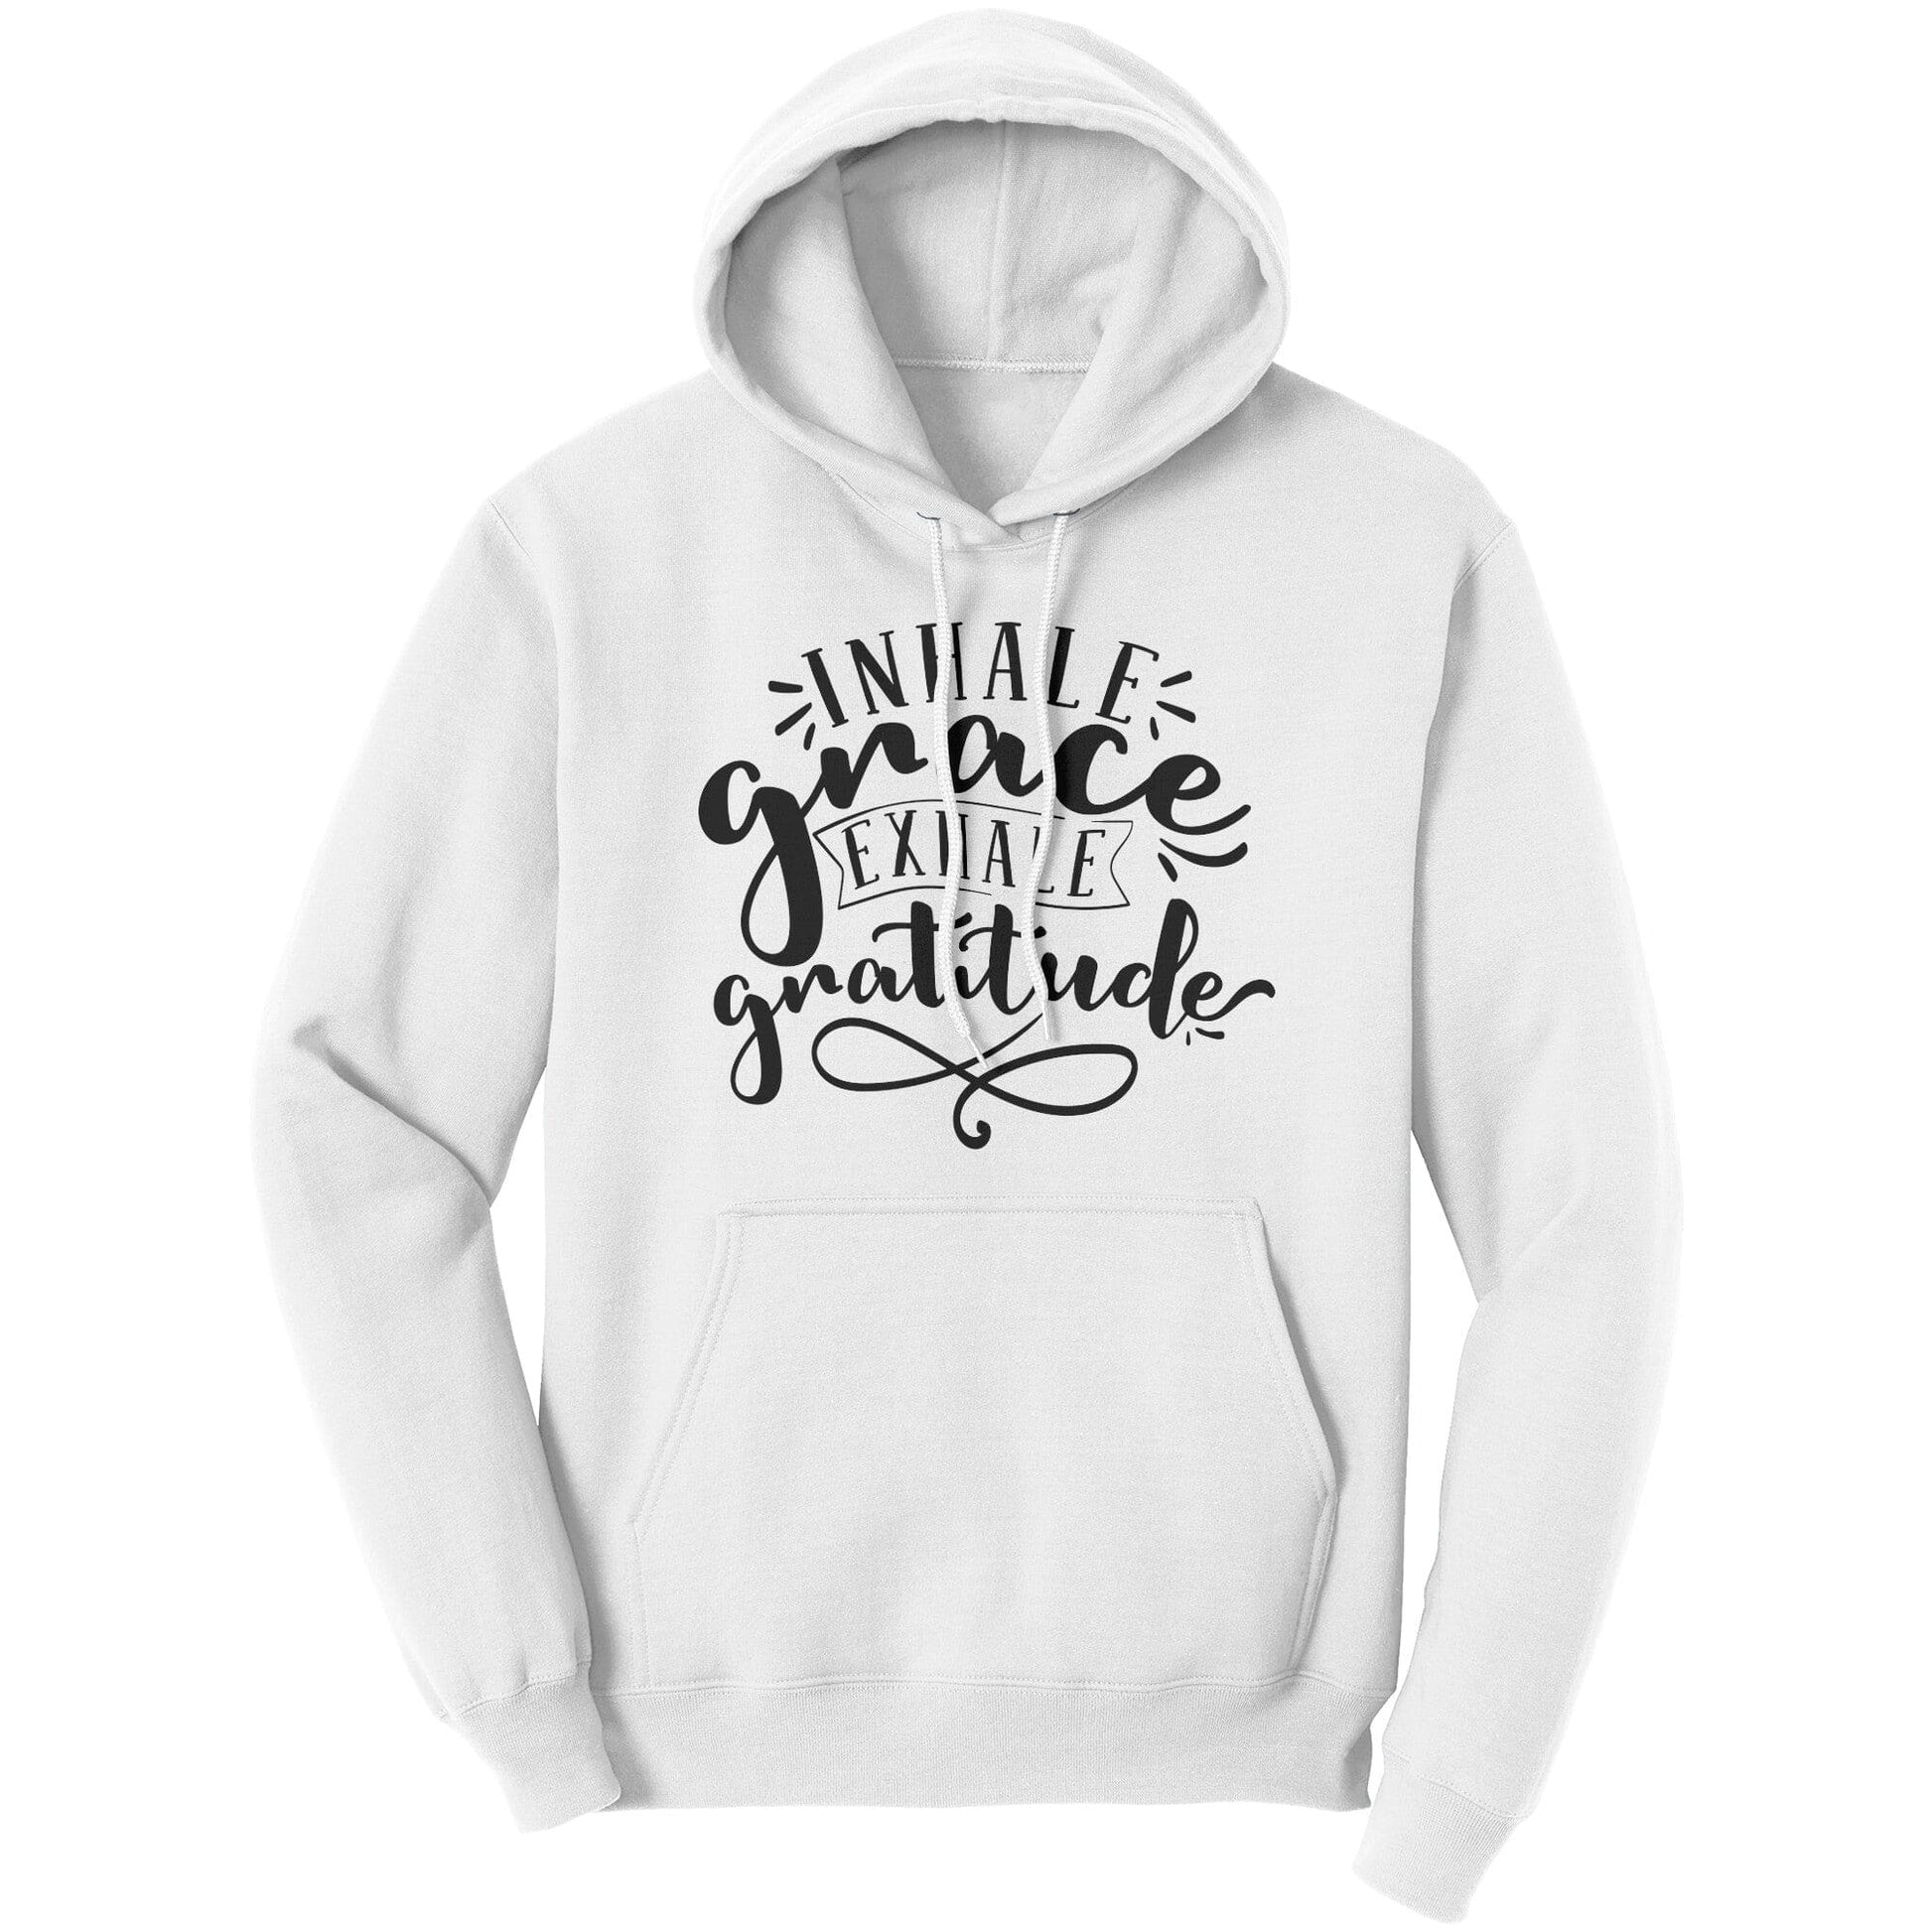 Uniquely You Graphic Hoodie Sweatshirt, Inhale Grace Exhale Gratitude Hooded Shirt - Scarvesnthangs